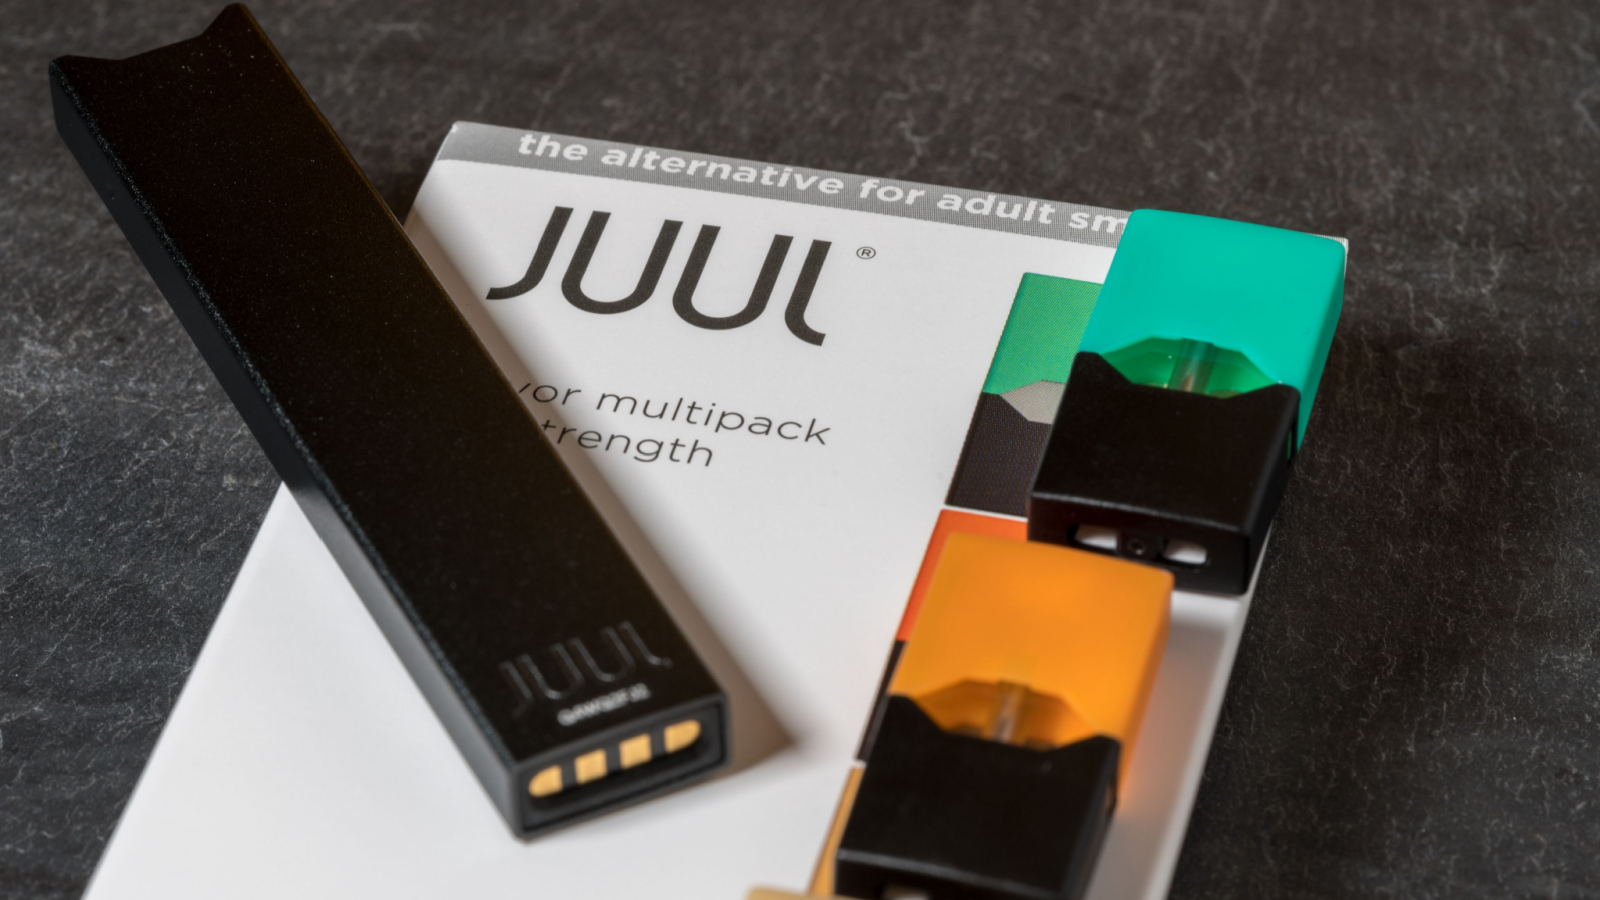 Juul Labs Layoffs 2022: What to Know About Juul Job Cuts, Bankruptcy Fears